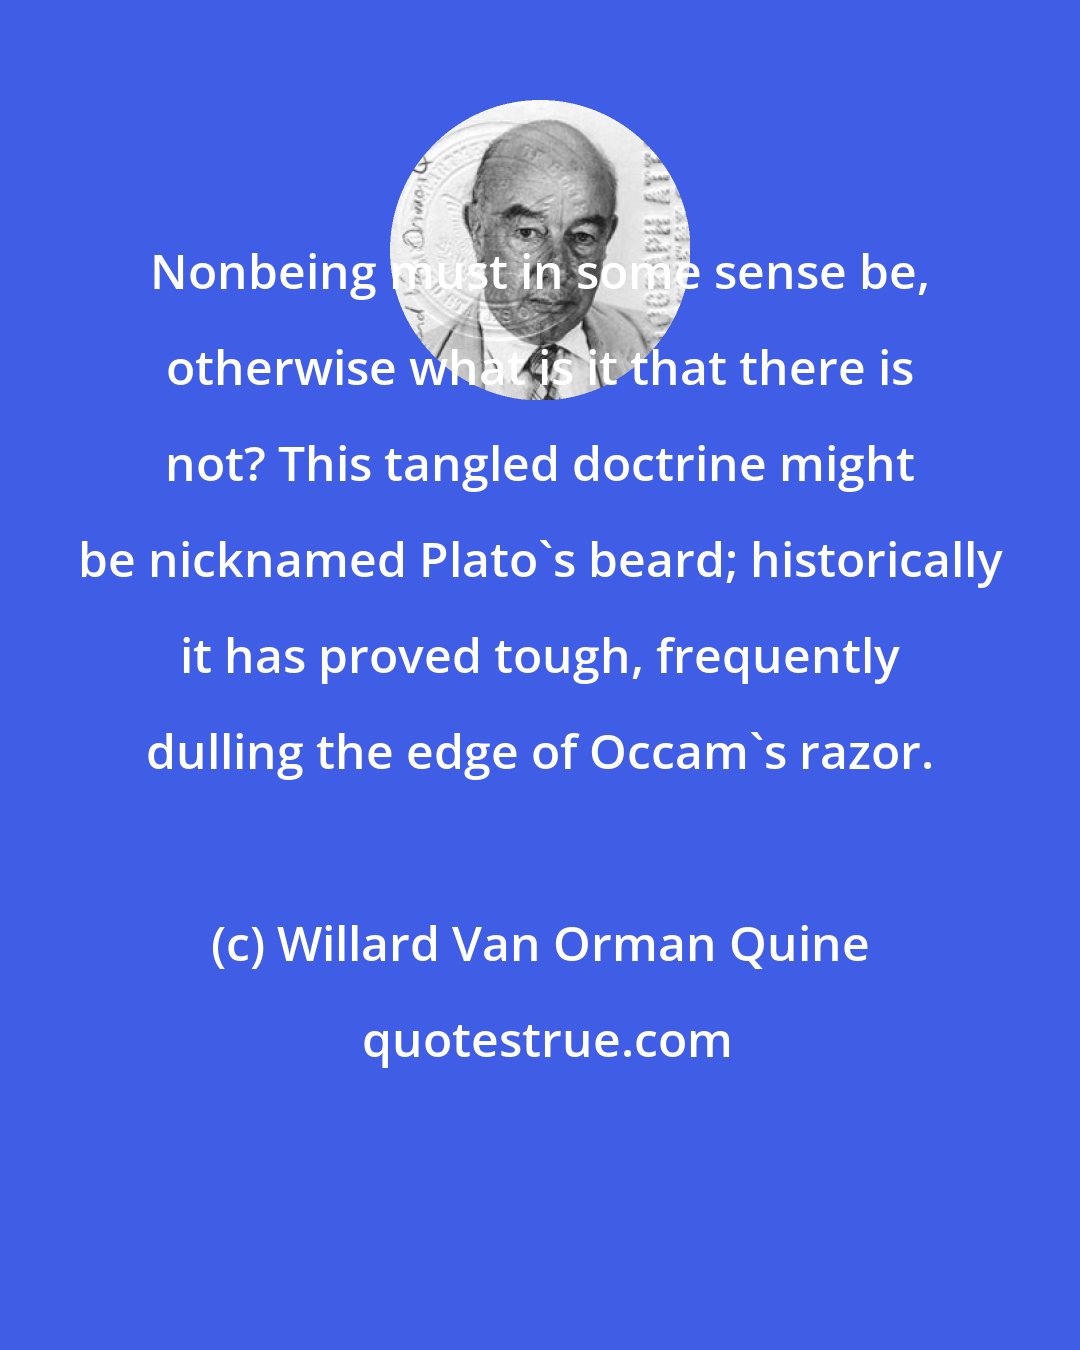 Willard Van Orman Quine: Nonbeing must in some sense be, otherwise what is it that there is not? This tangled doctrine might be nicknamed Plato's beard; historically it has proved tough, frequently dulling the edge of Occam's razor.